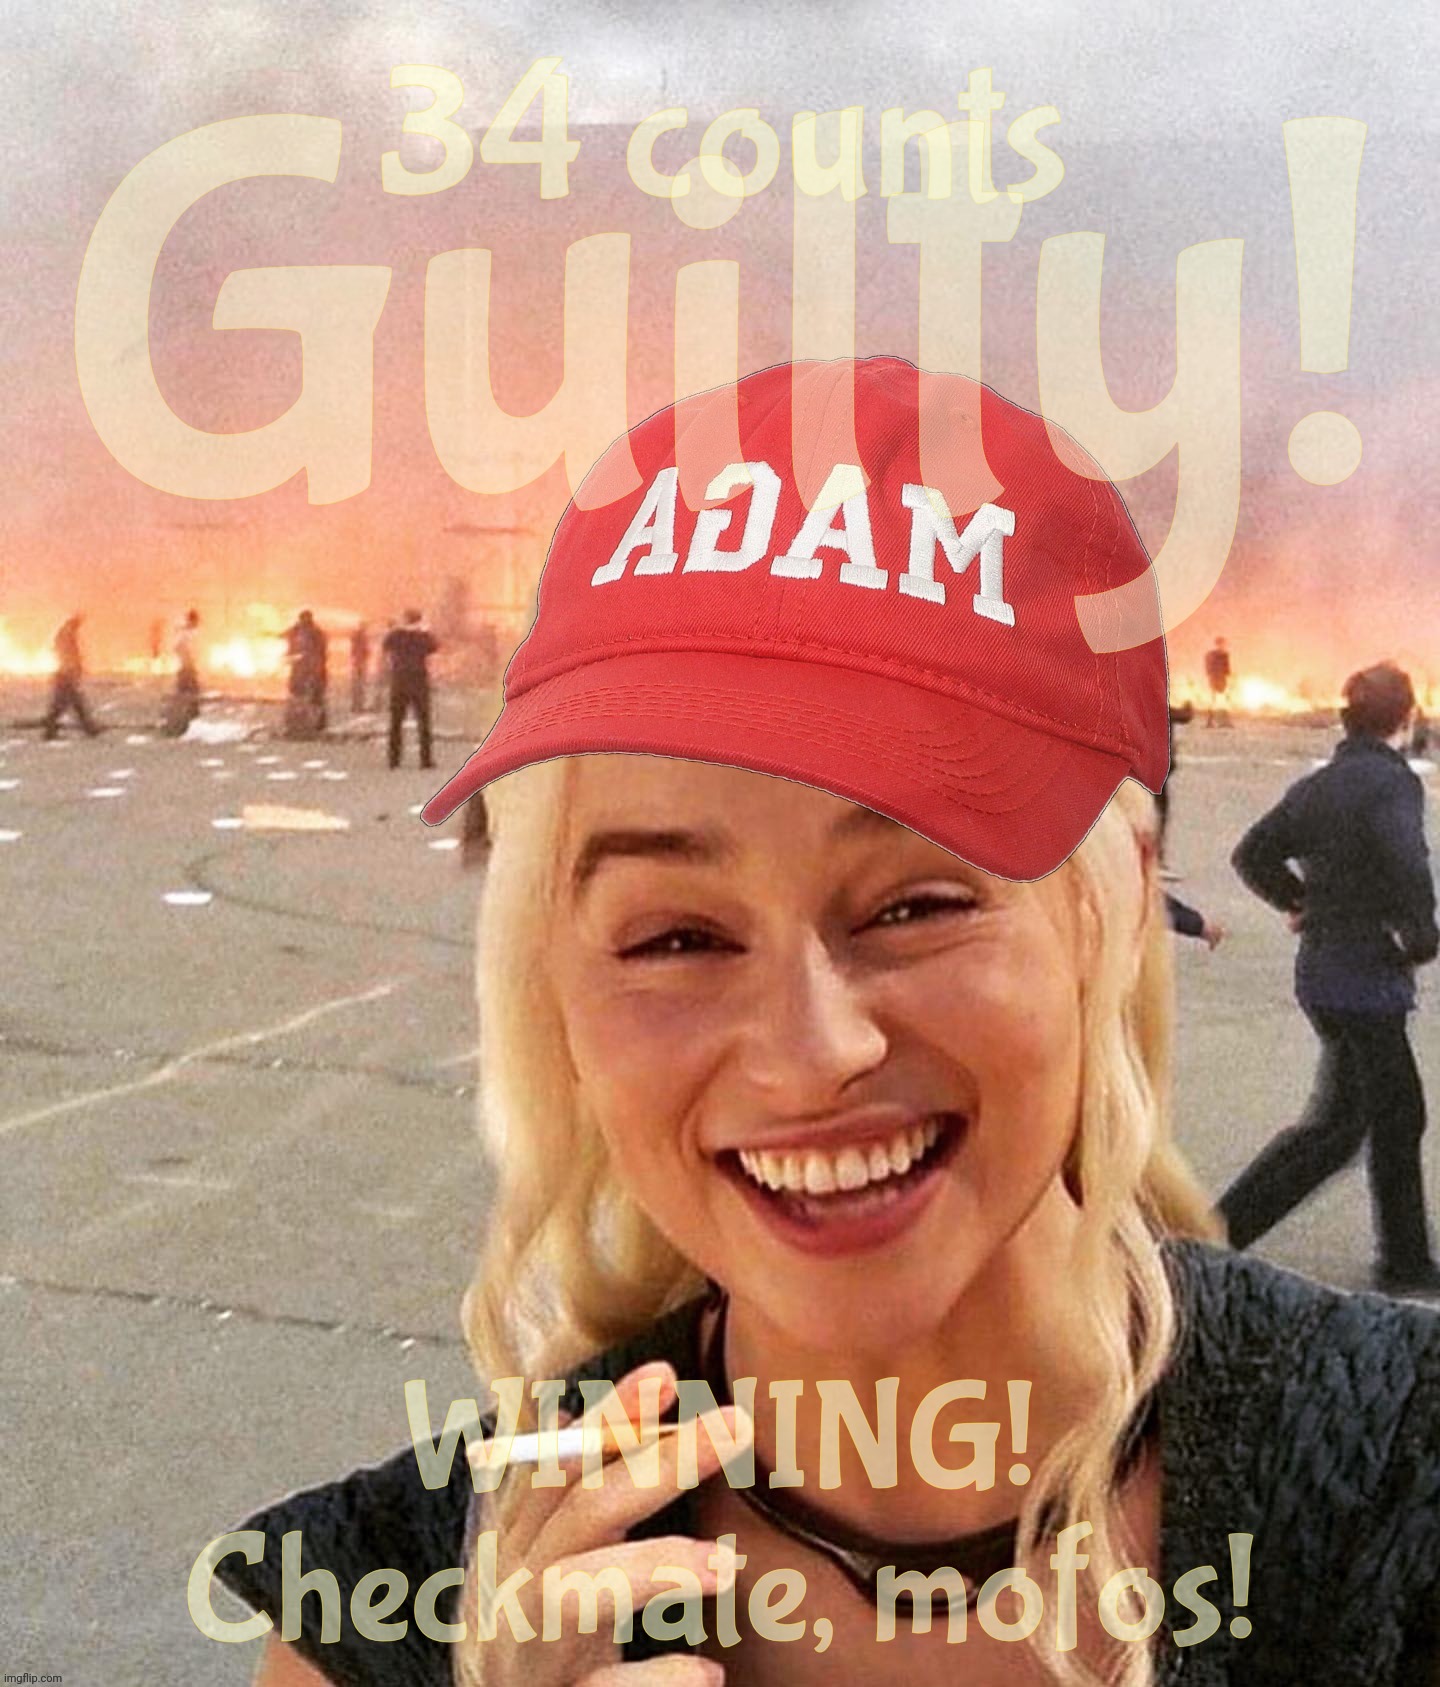 34 counts, guilty | Guilty! 34 counts; WINNING!
Checkmate, mofos! | image tagged in disaster smoker girl maga edition,trump new york criminal trial,34 counts guilty,trump,donald trump,convicted criminal | made w/ Imgflip meme maker